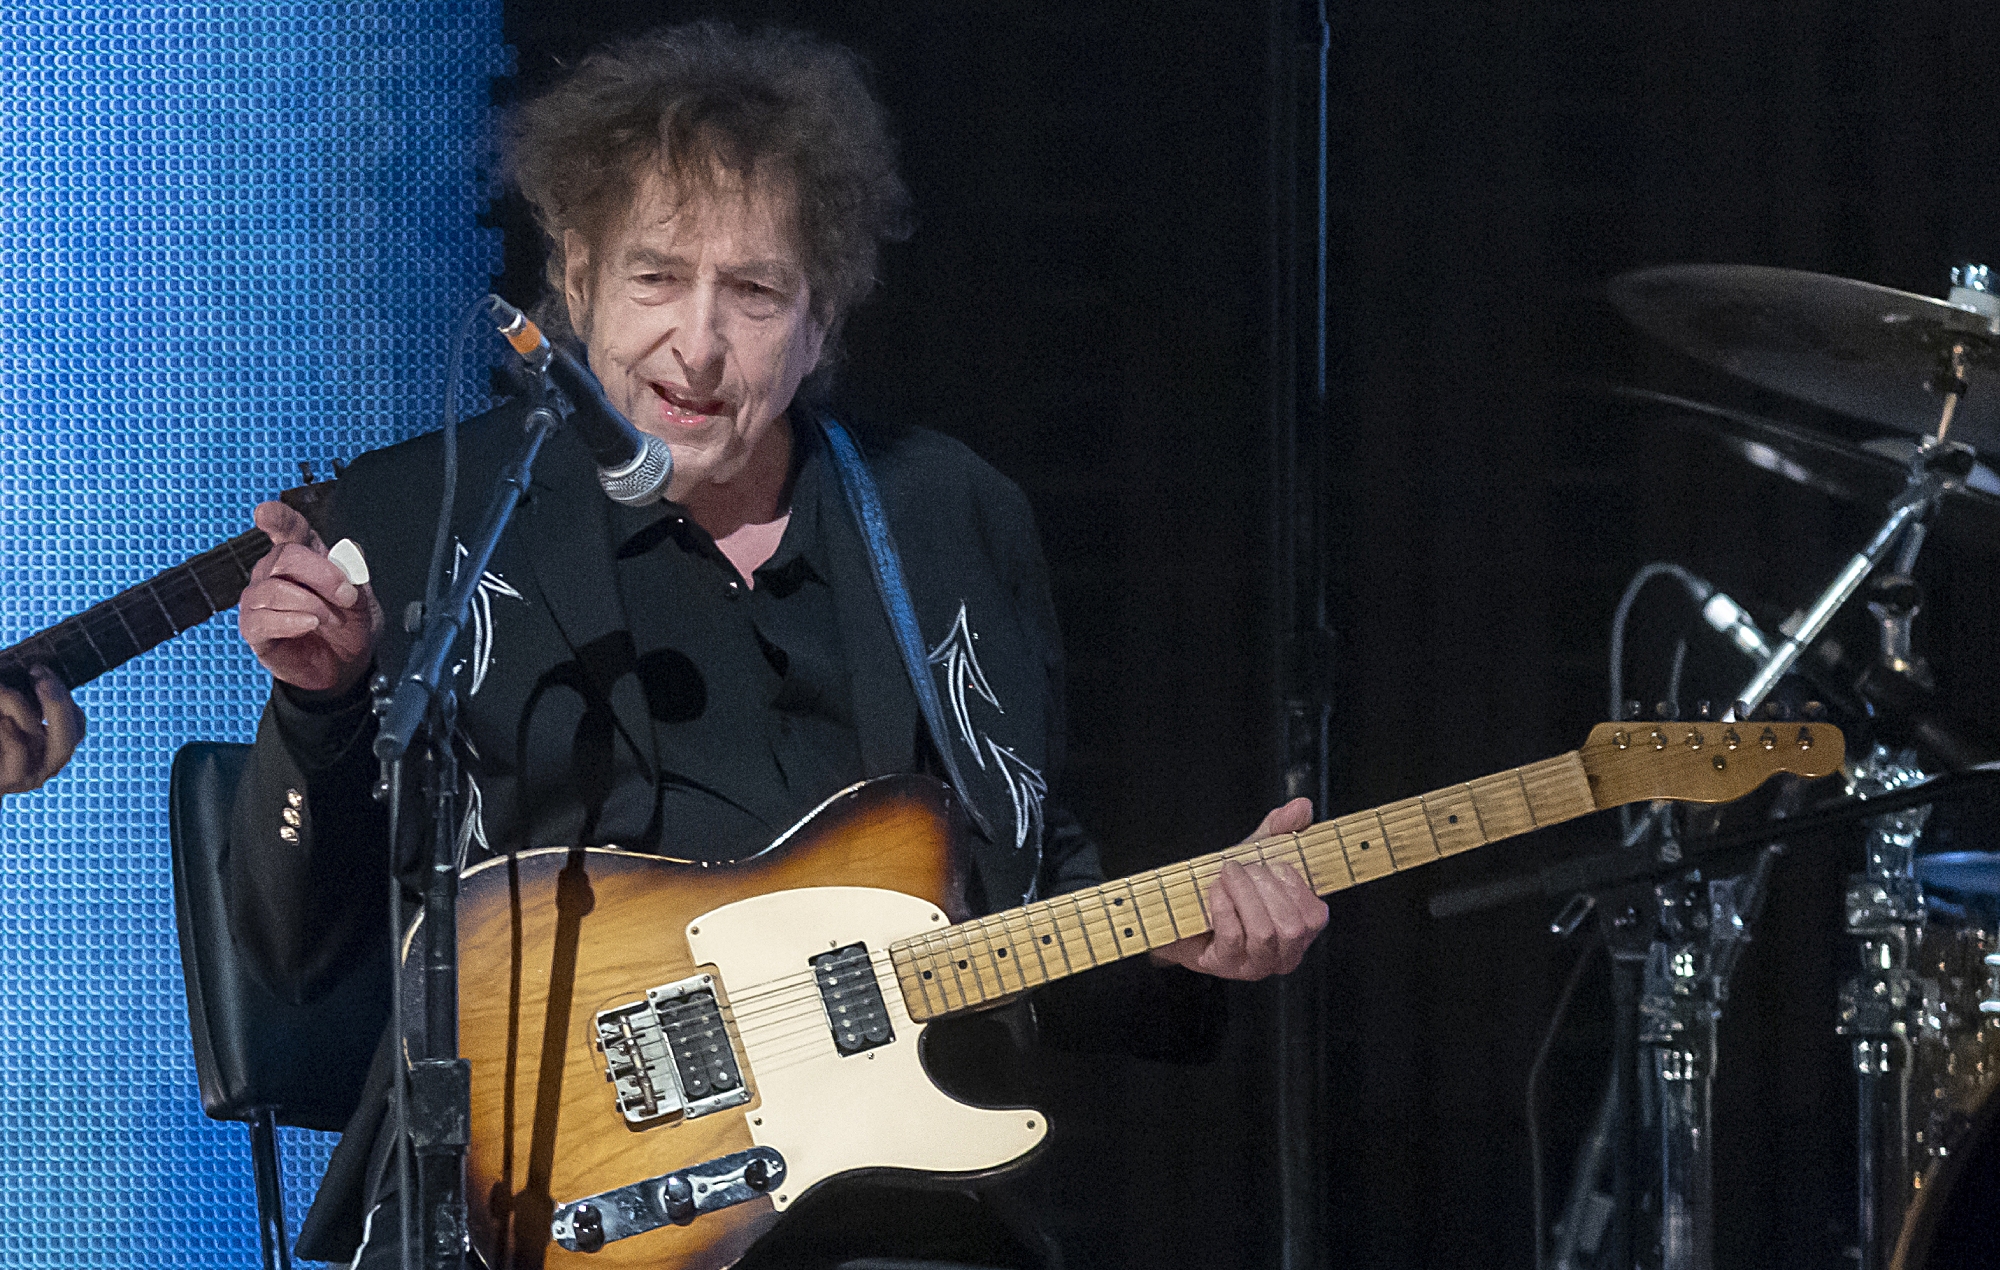 Bob Dylan debuts surprise cover of Leonard Cohen’s ‘Dance Me to the End of Love’